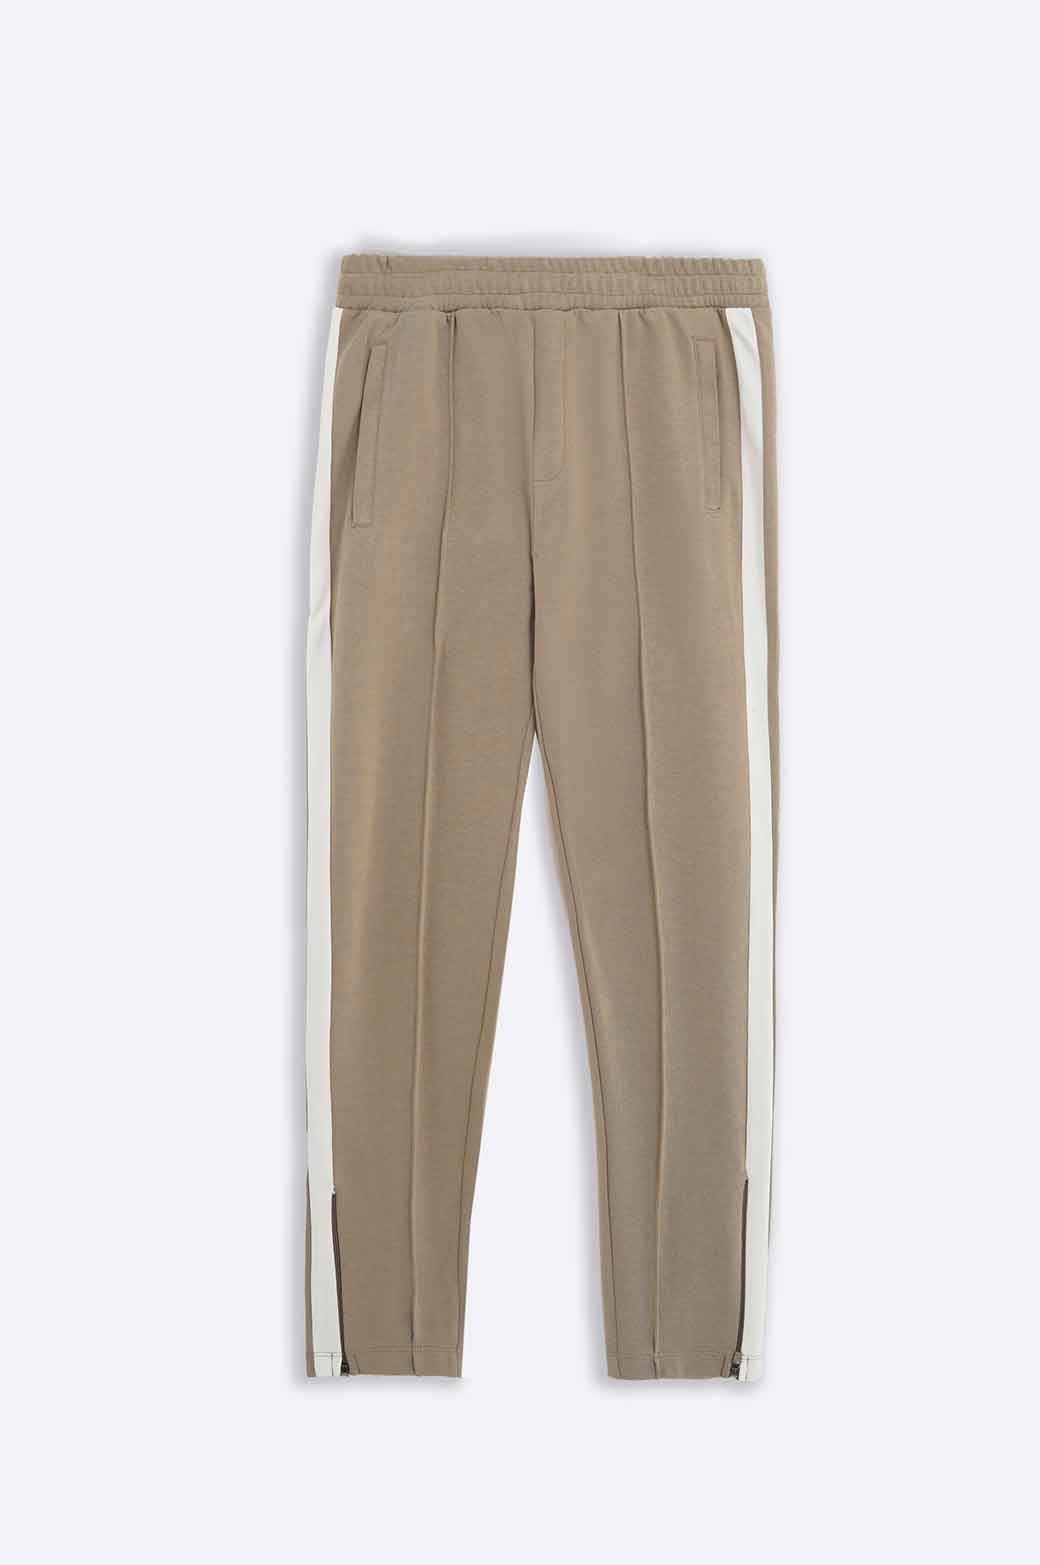 khaki TROUSER WITH SIDE PANEL